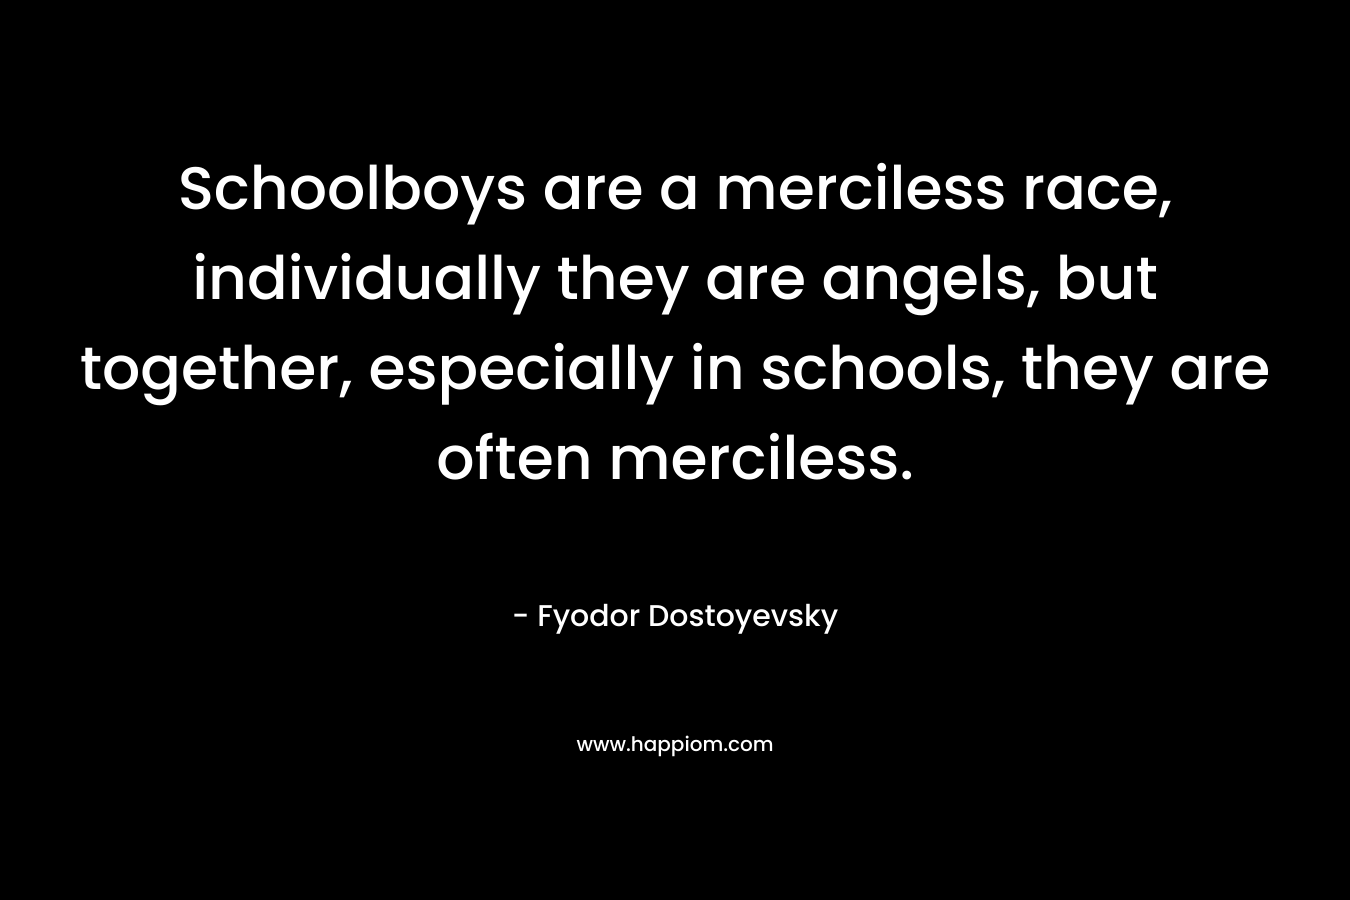 Schoolboys are a merciless race, individually they are angels, but together, especially in schools, they are often merciless. – Fyodor Dostoyevsky